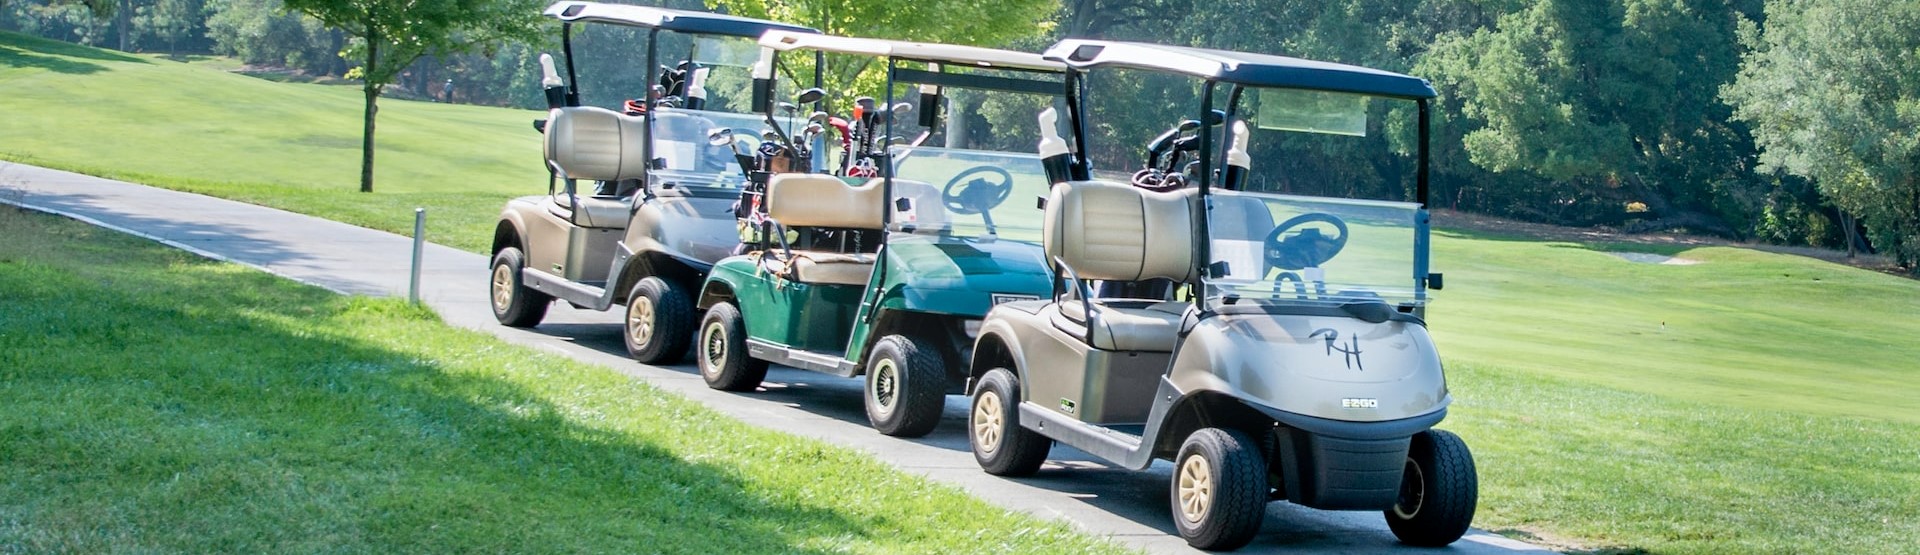 Three golf cart parked at the golf course | Breast Cancer Car Donations